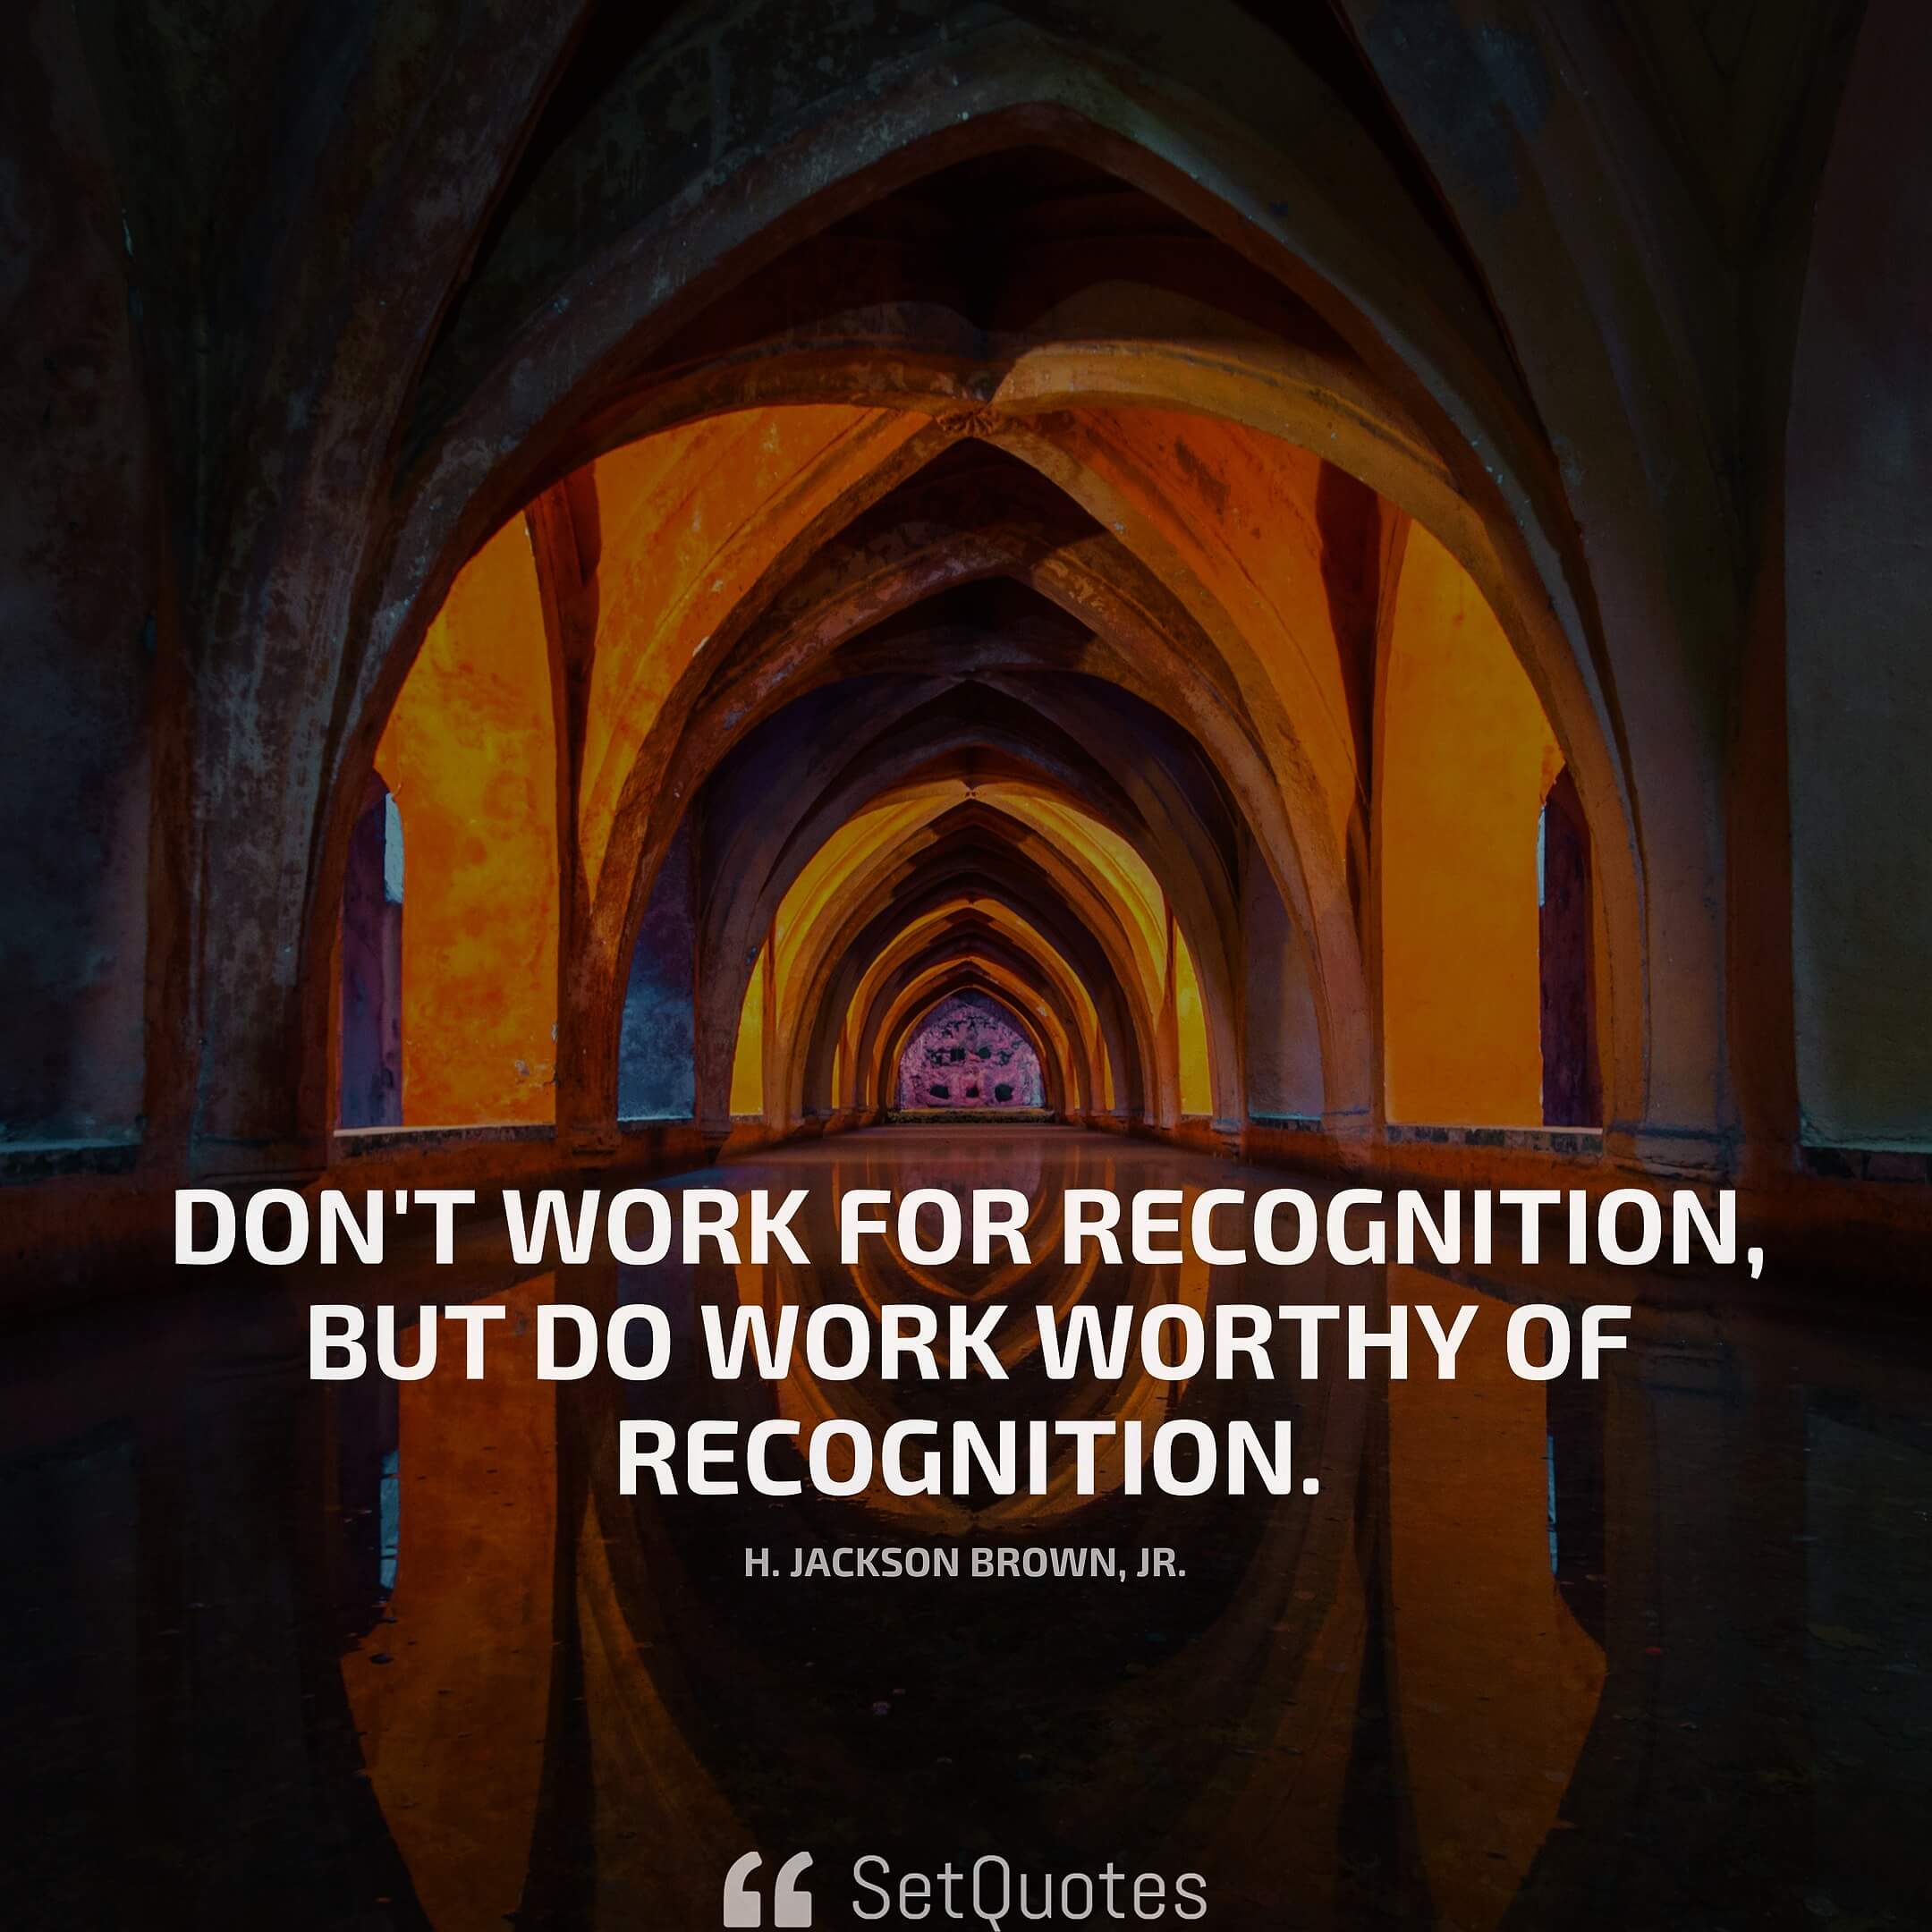 Don't work for recognition, but do work worthy of recognition. - H. Jackson Brown, Jr.